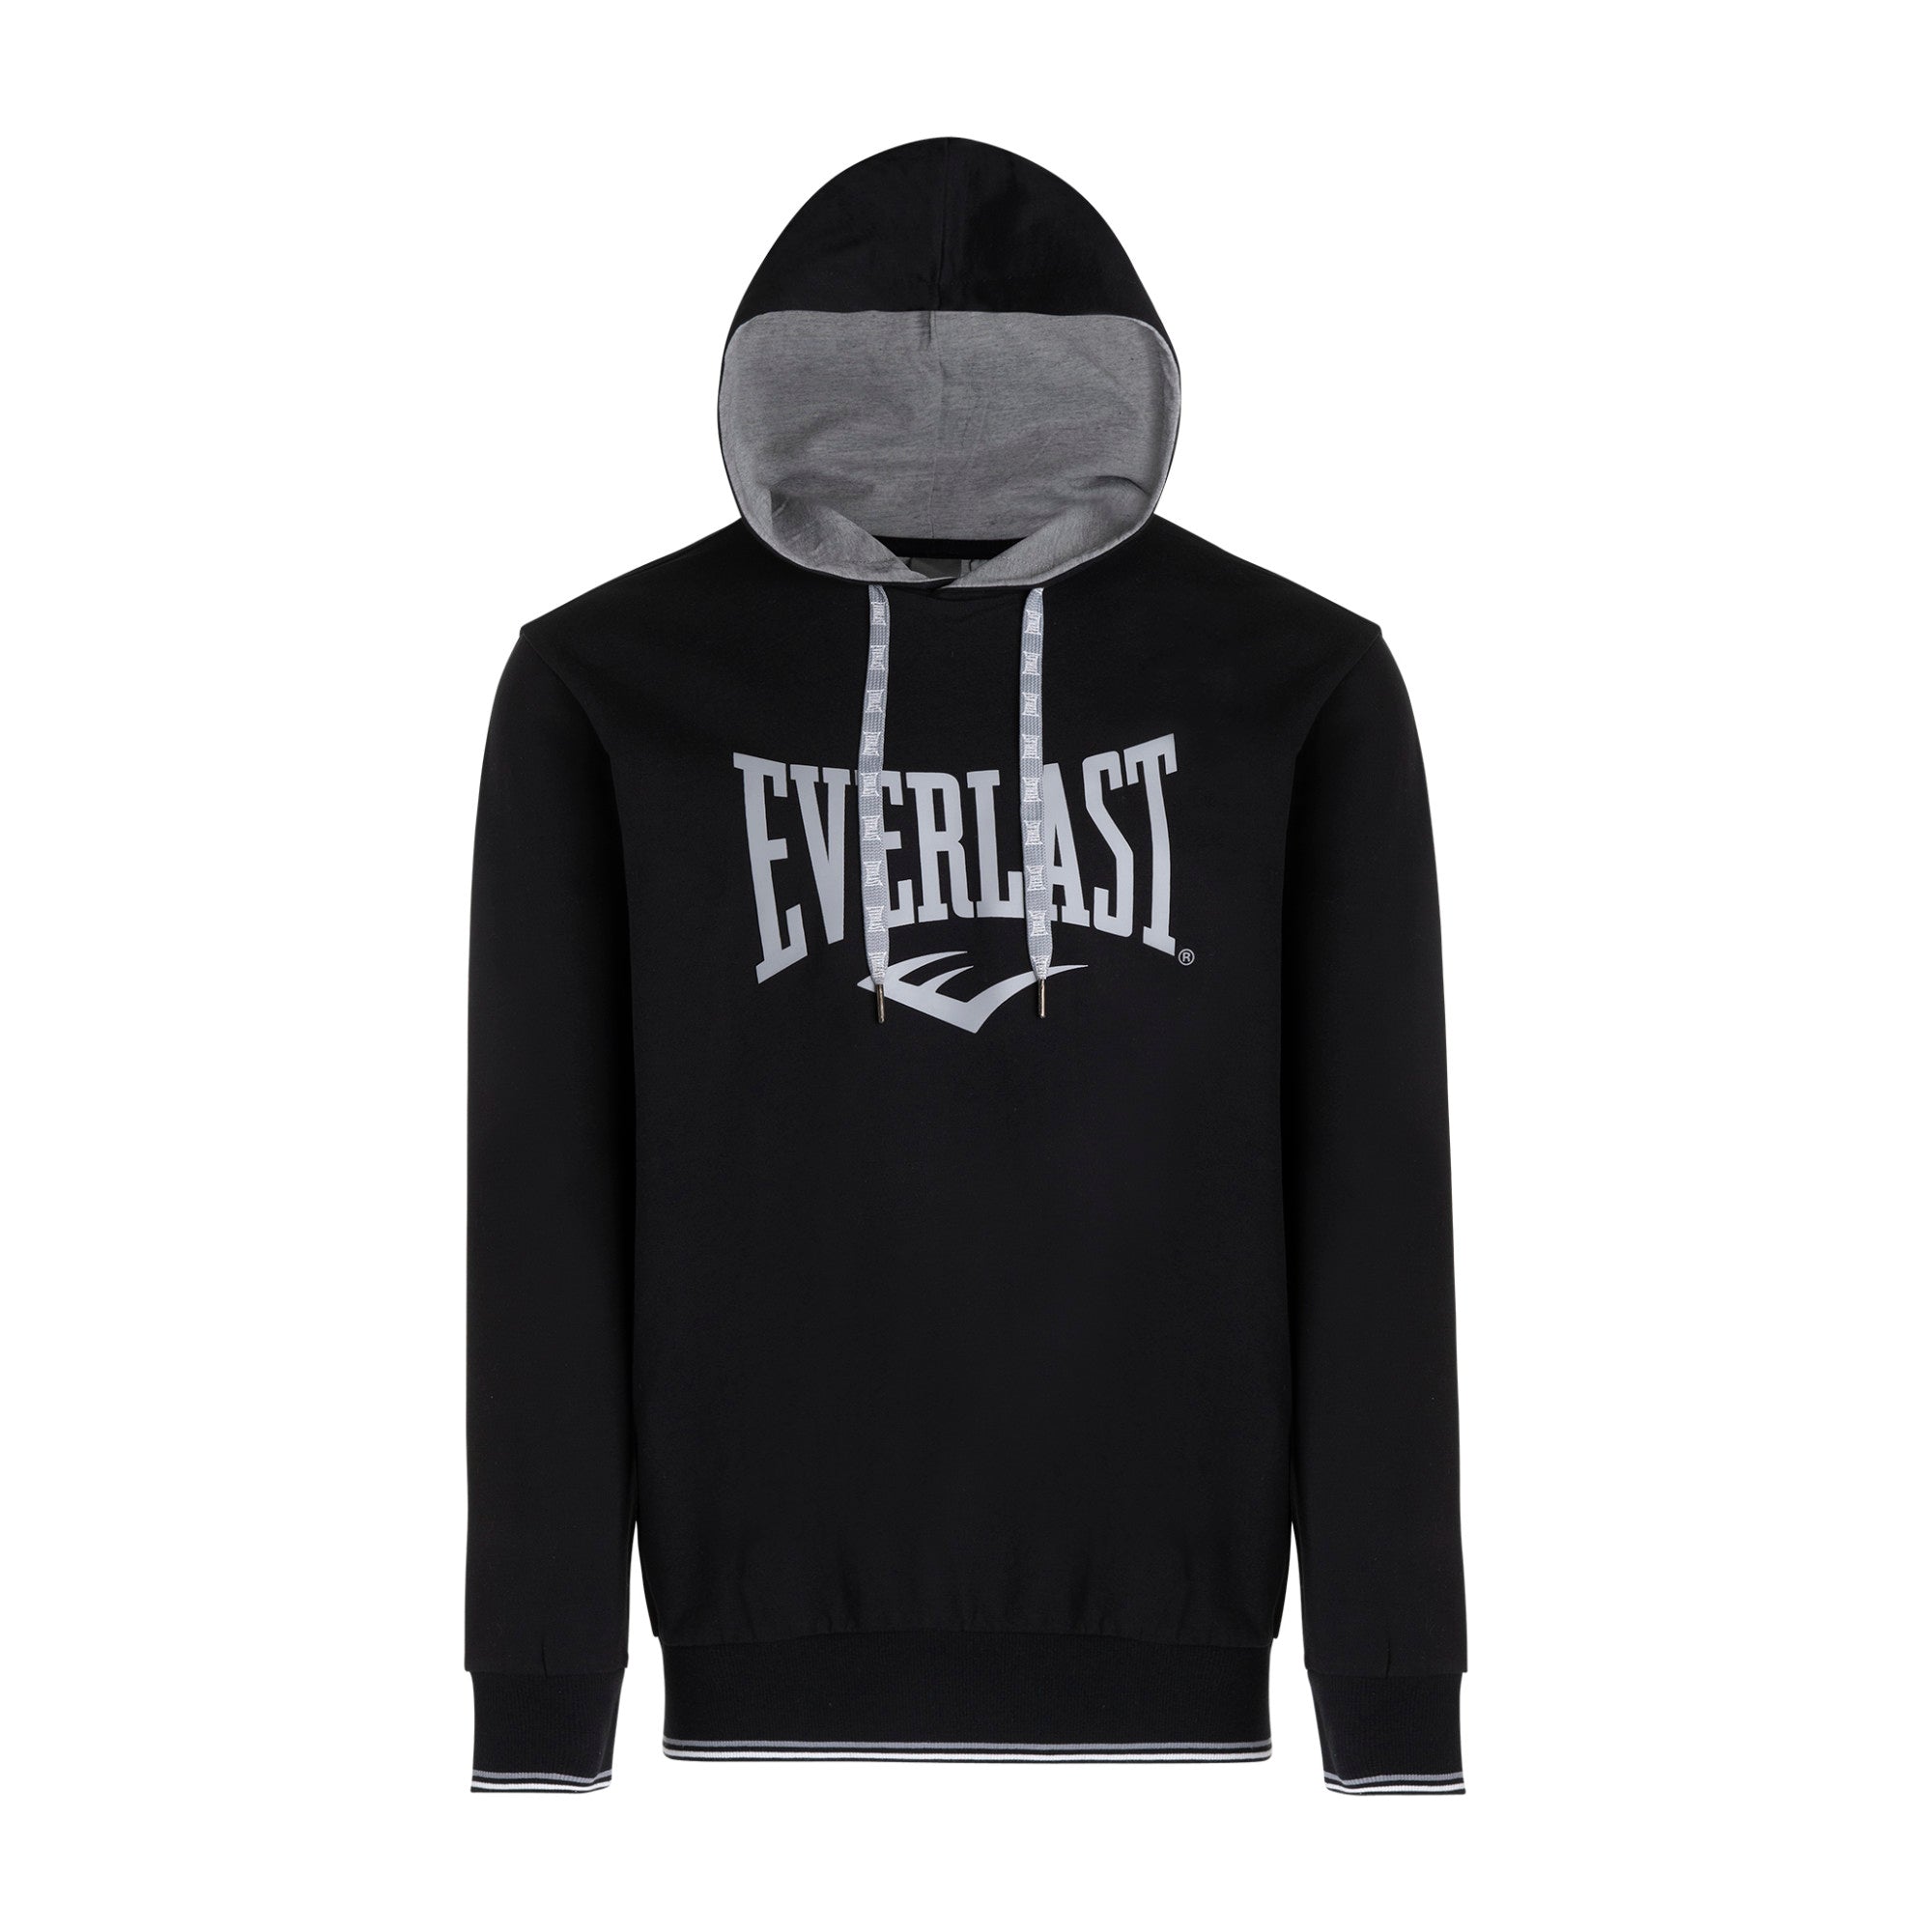 Buy French Terry Pullover Hoodie (B&T) Men's Hoodies from Russell